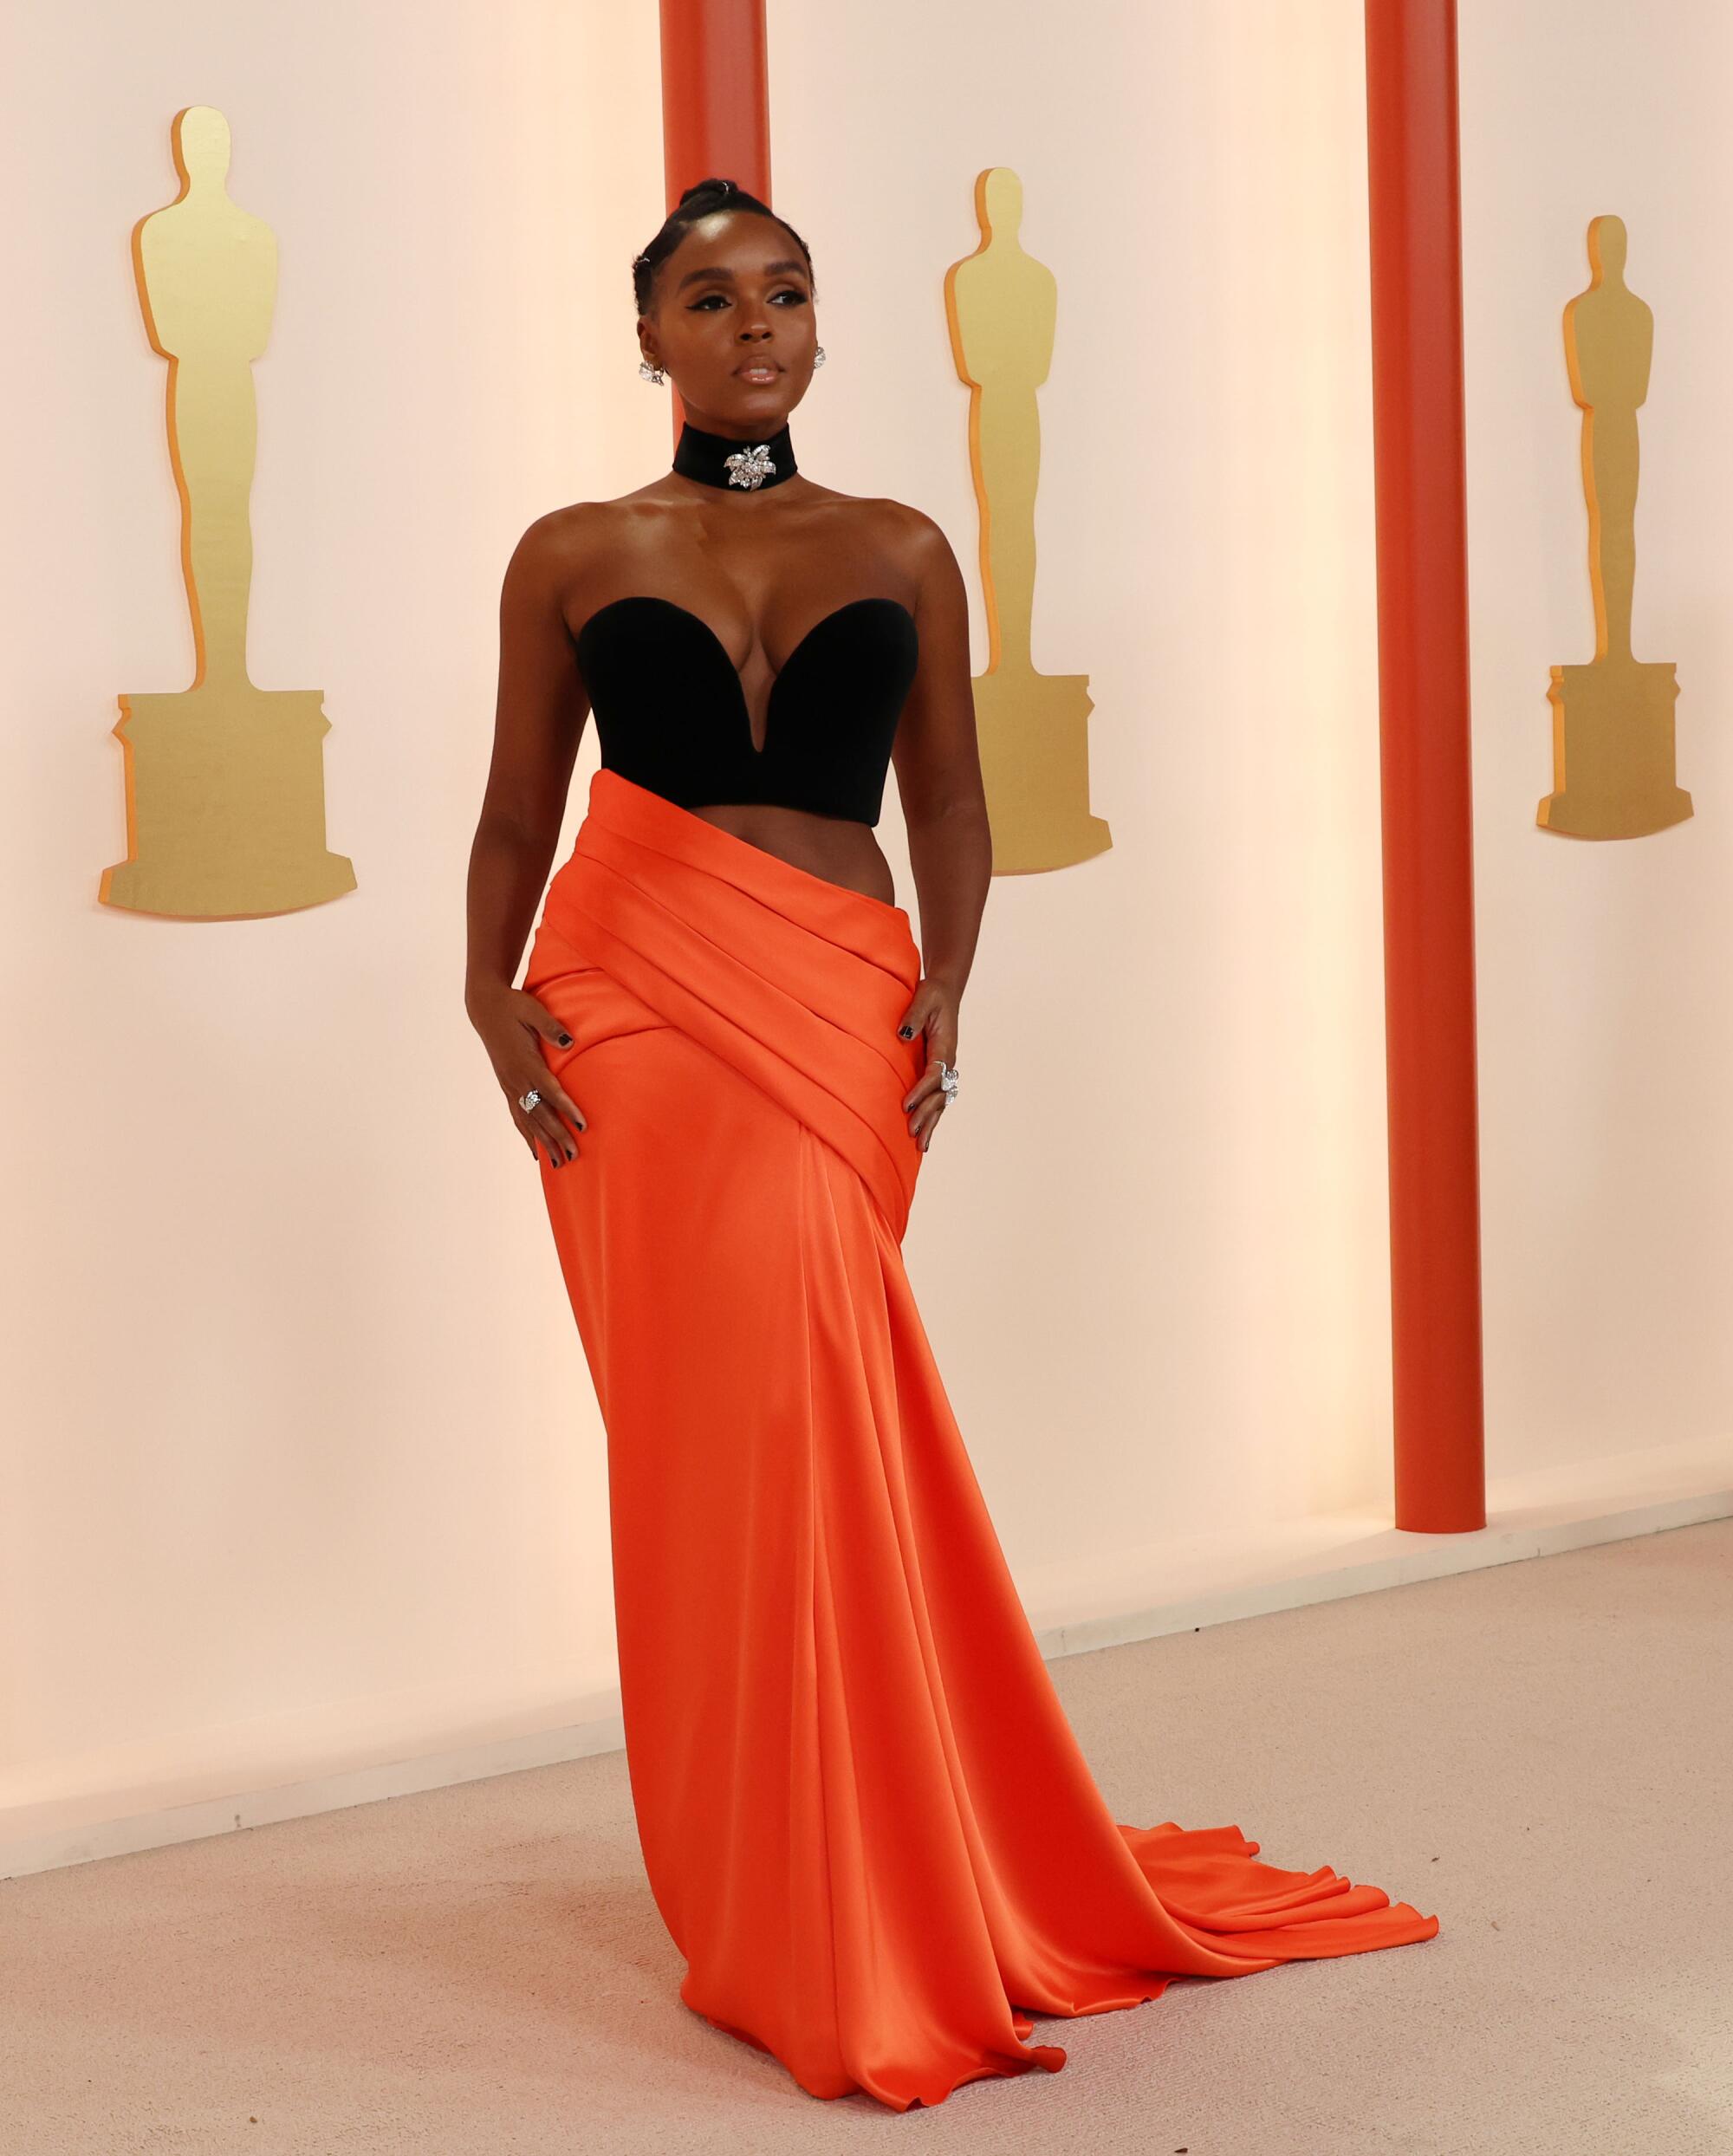 Janelle Monáe in a black bustier top and wrapped red long skirt.